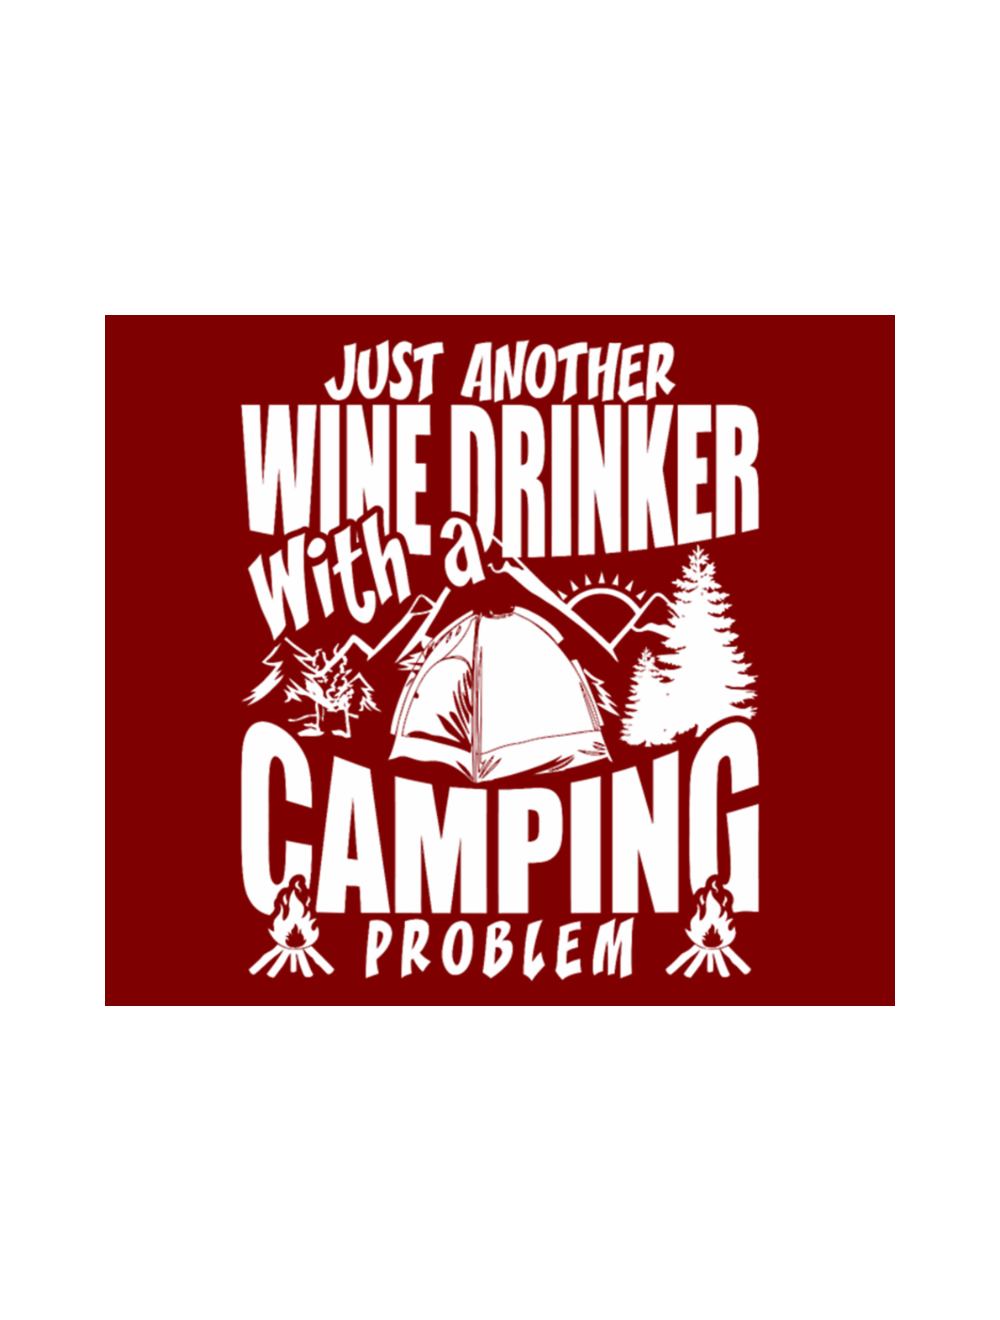 Drink Coaster Just Another Wine Drinker with a Camping Problem